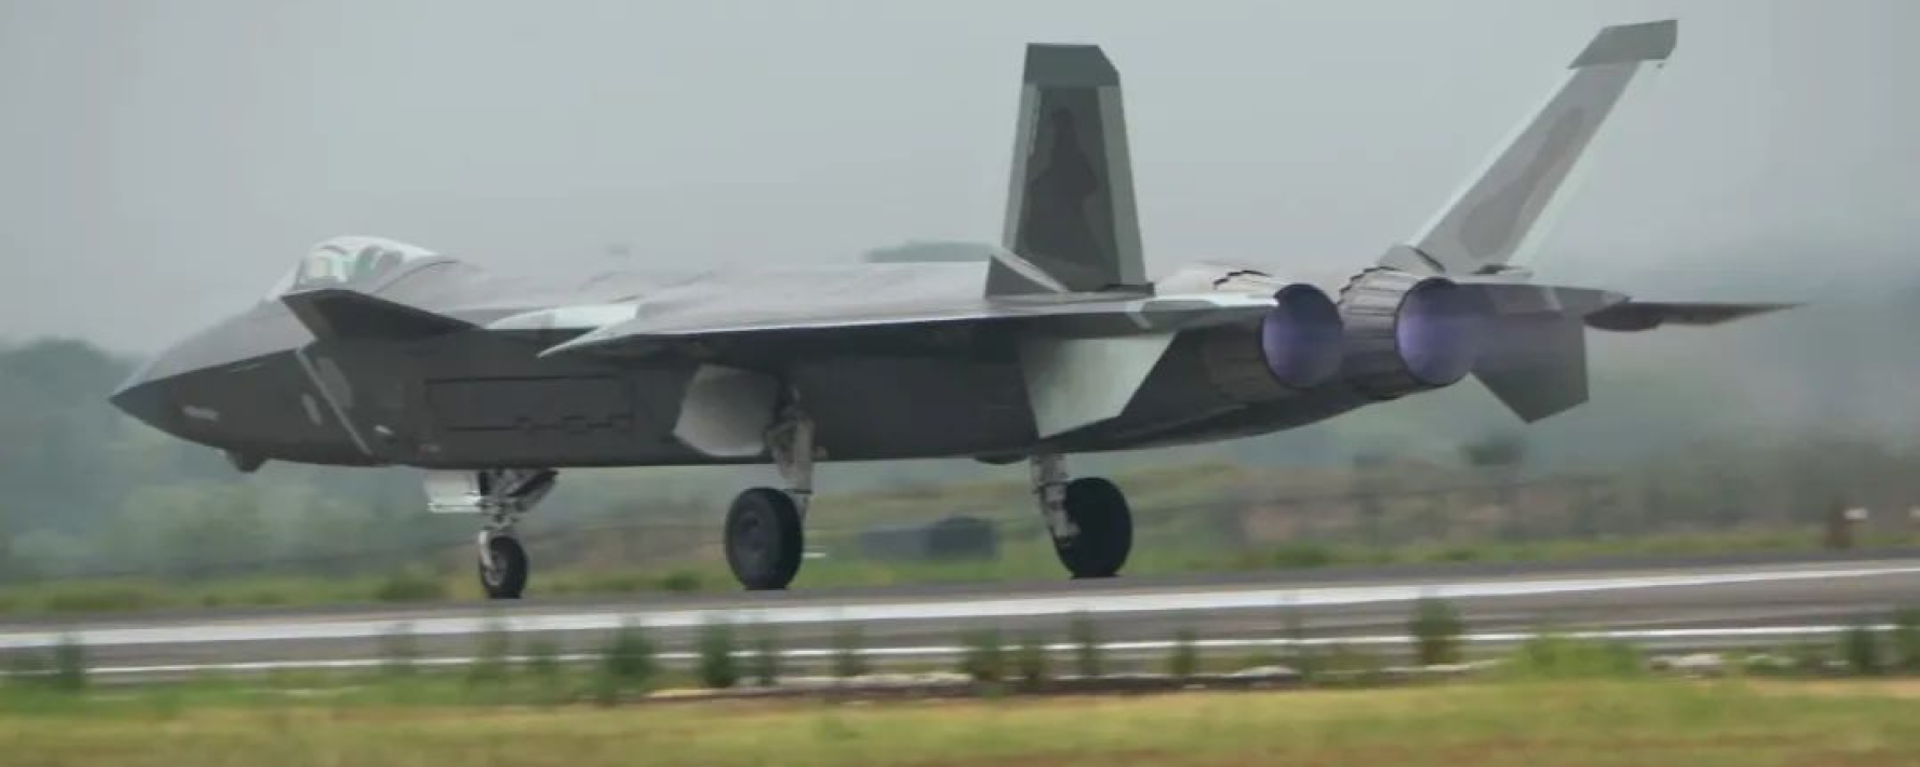 A J-20 stealth fighter of China's People's Liberation Army Air Force (PLAAF) takes part in drills near Taiwan on August 3, 2022. - Sputnik International, 1920, 10.04.2023